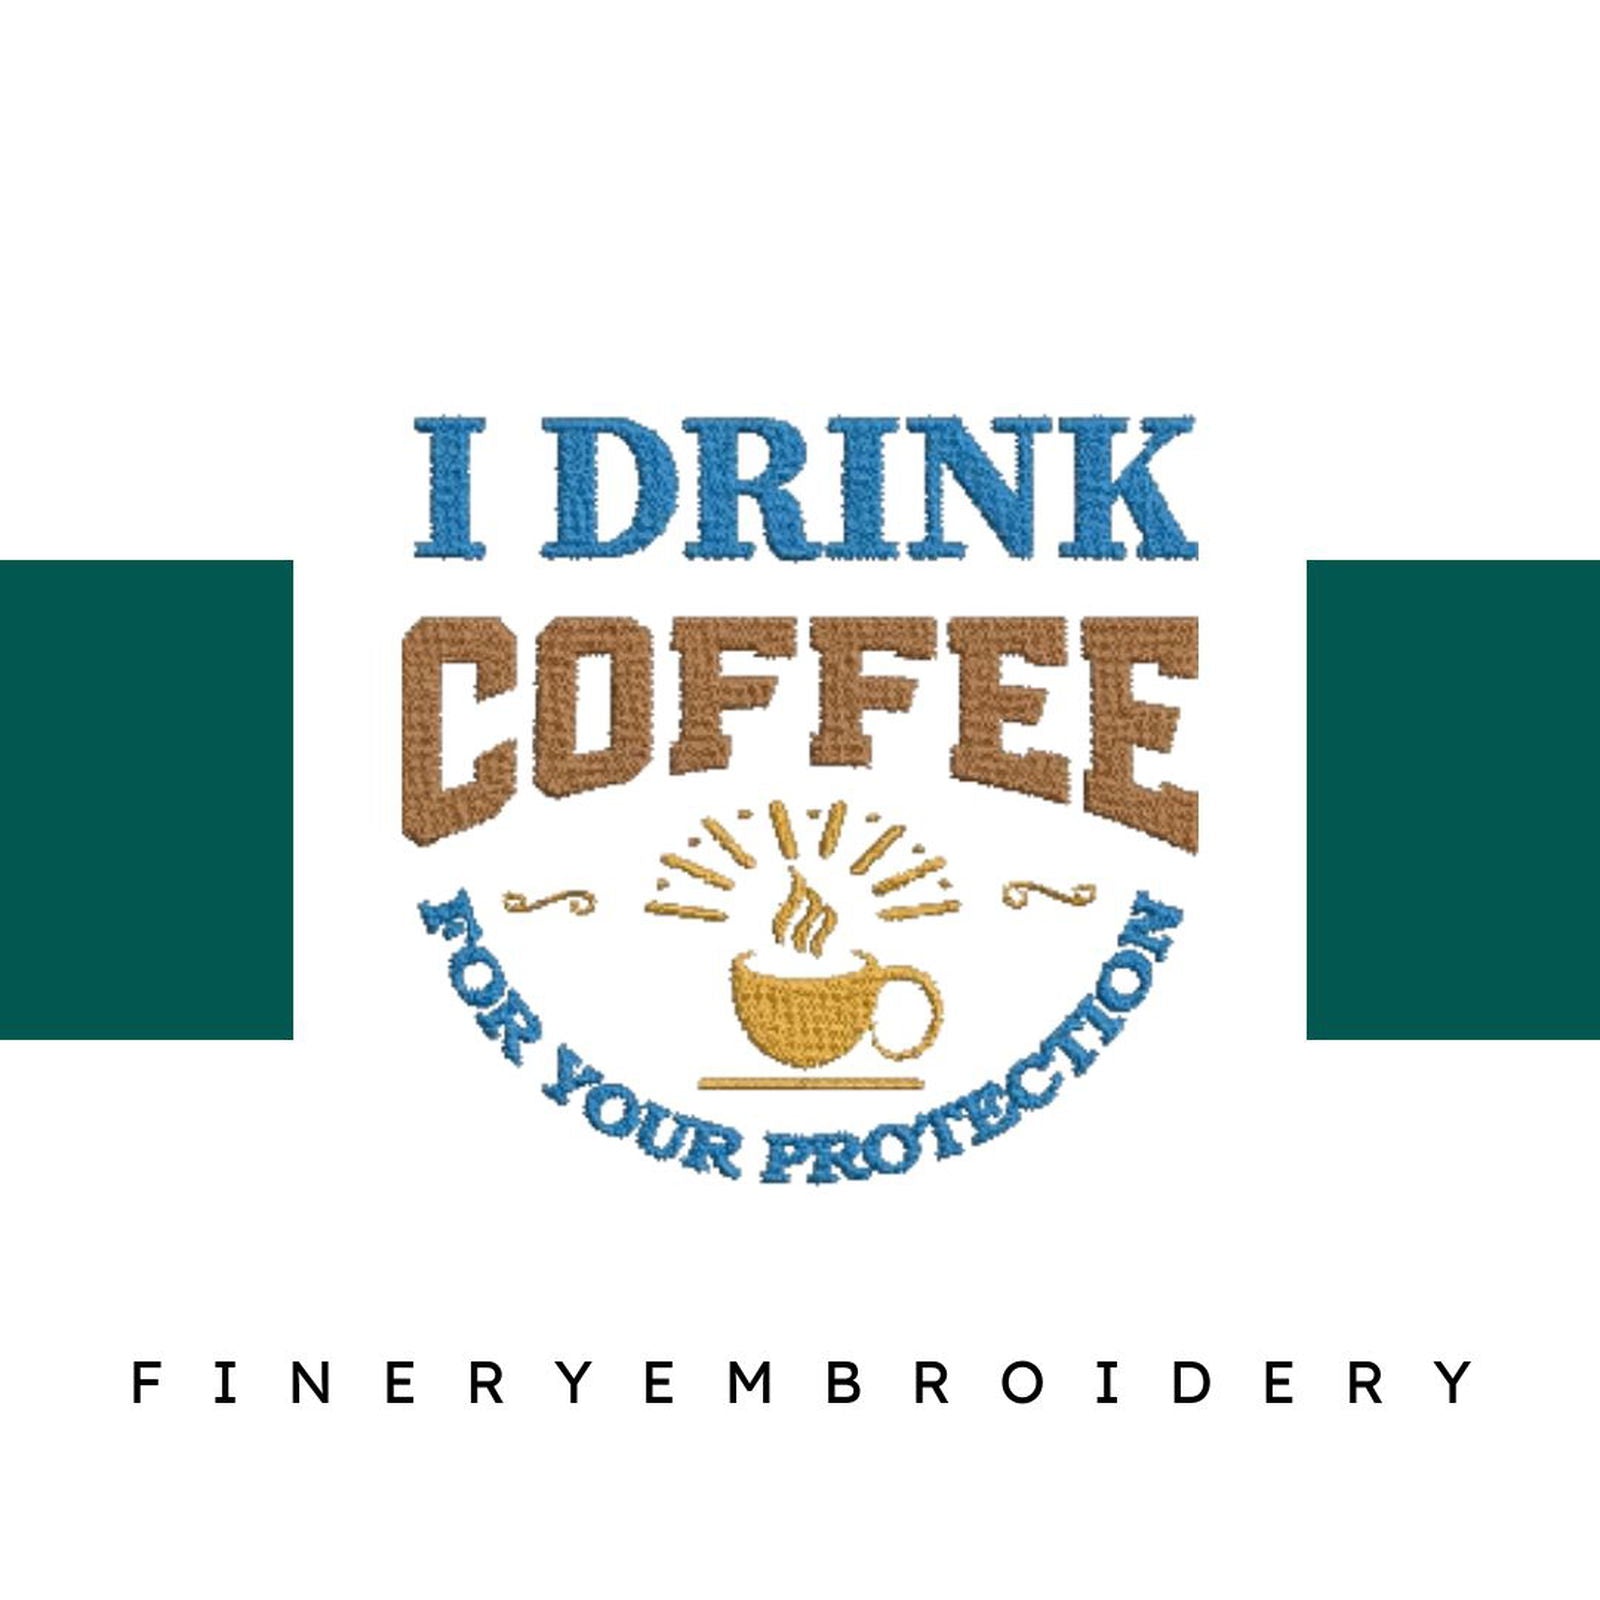 I-Drink-Coffee - Embroidery Design - FineryEmbroidery